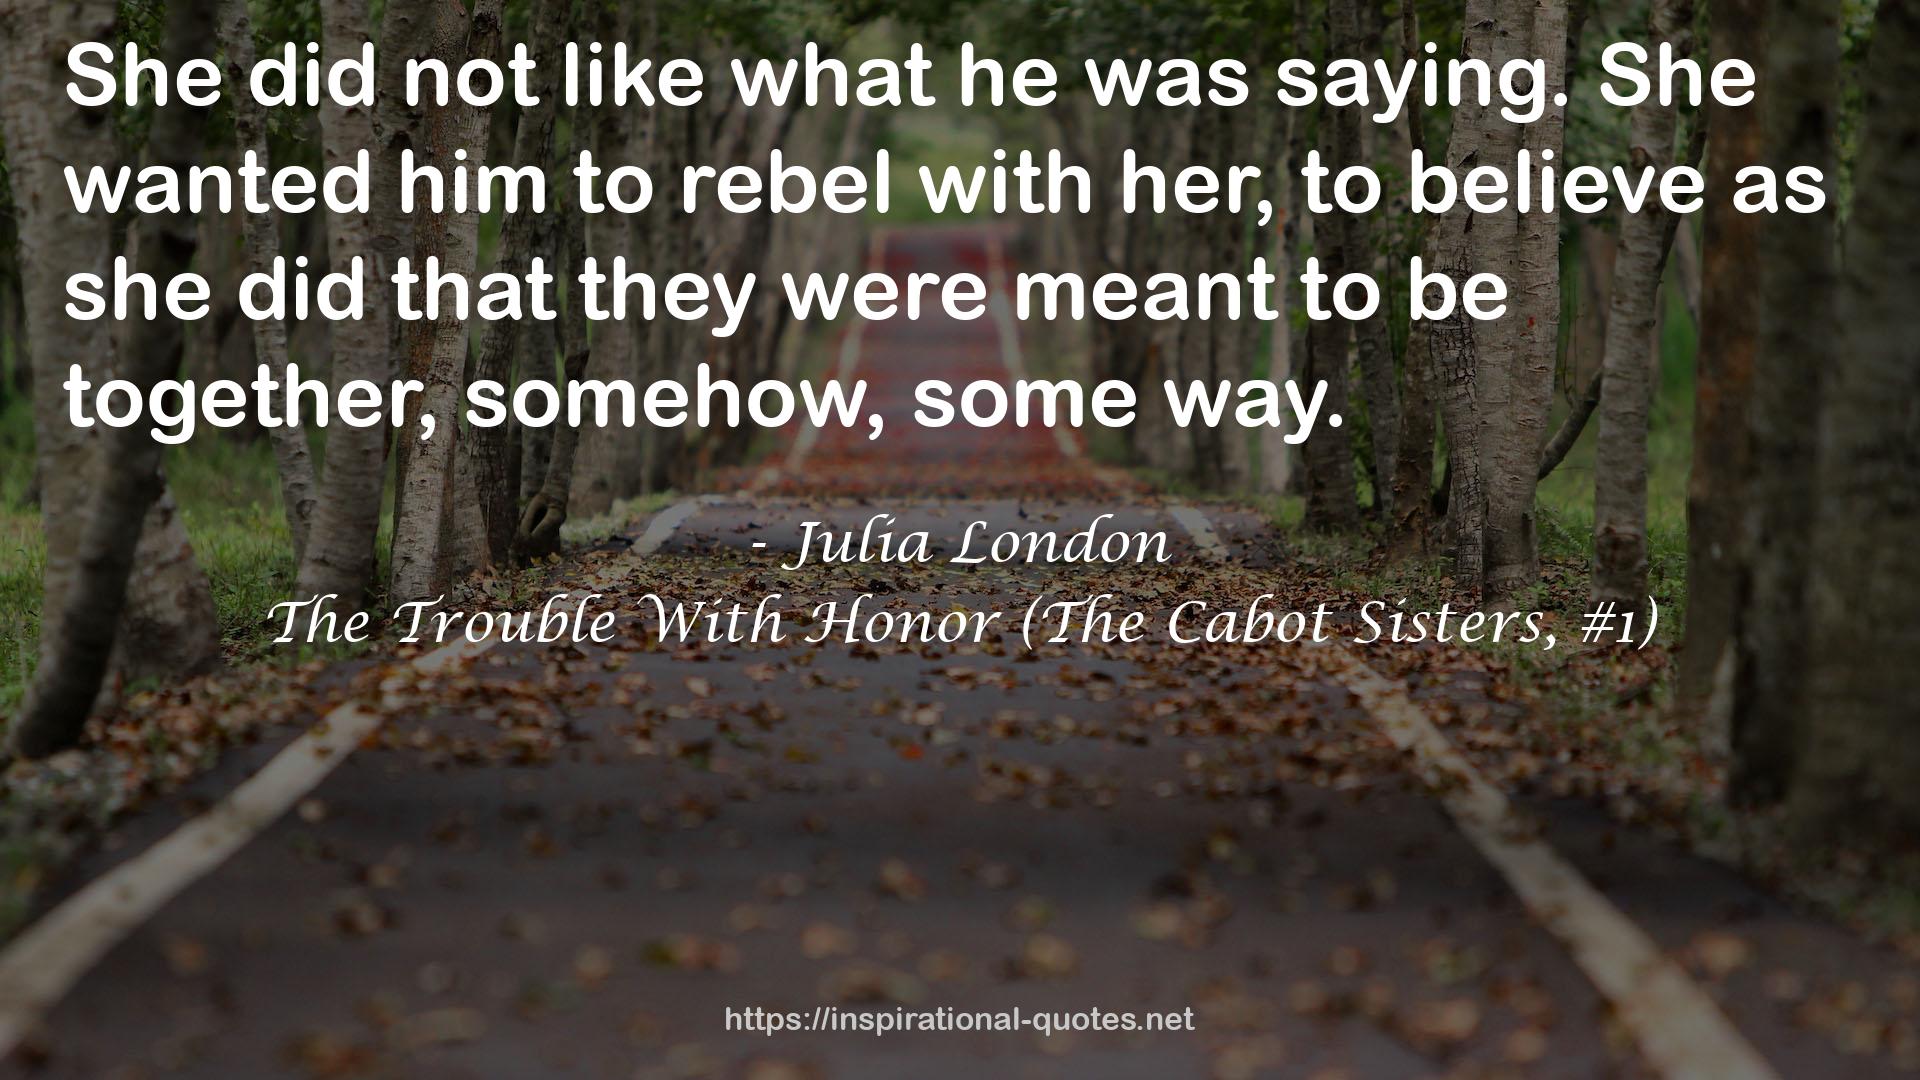 The Trouble With Honor (The Cabot Sisters, #1) QUOTES